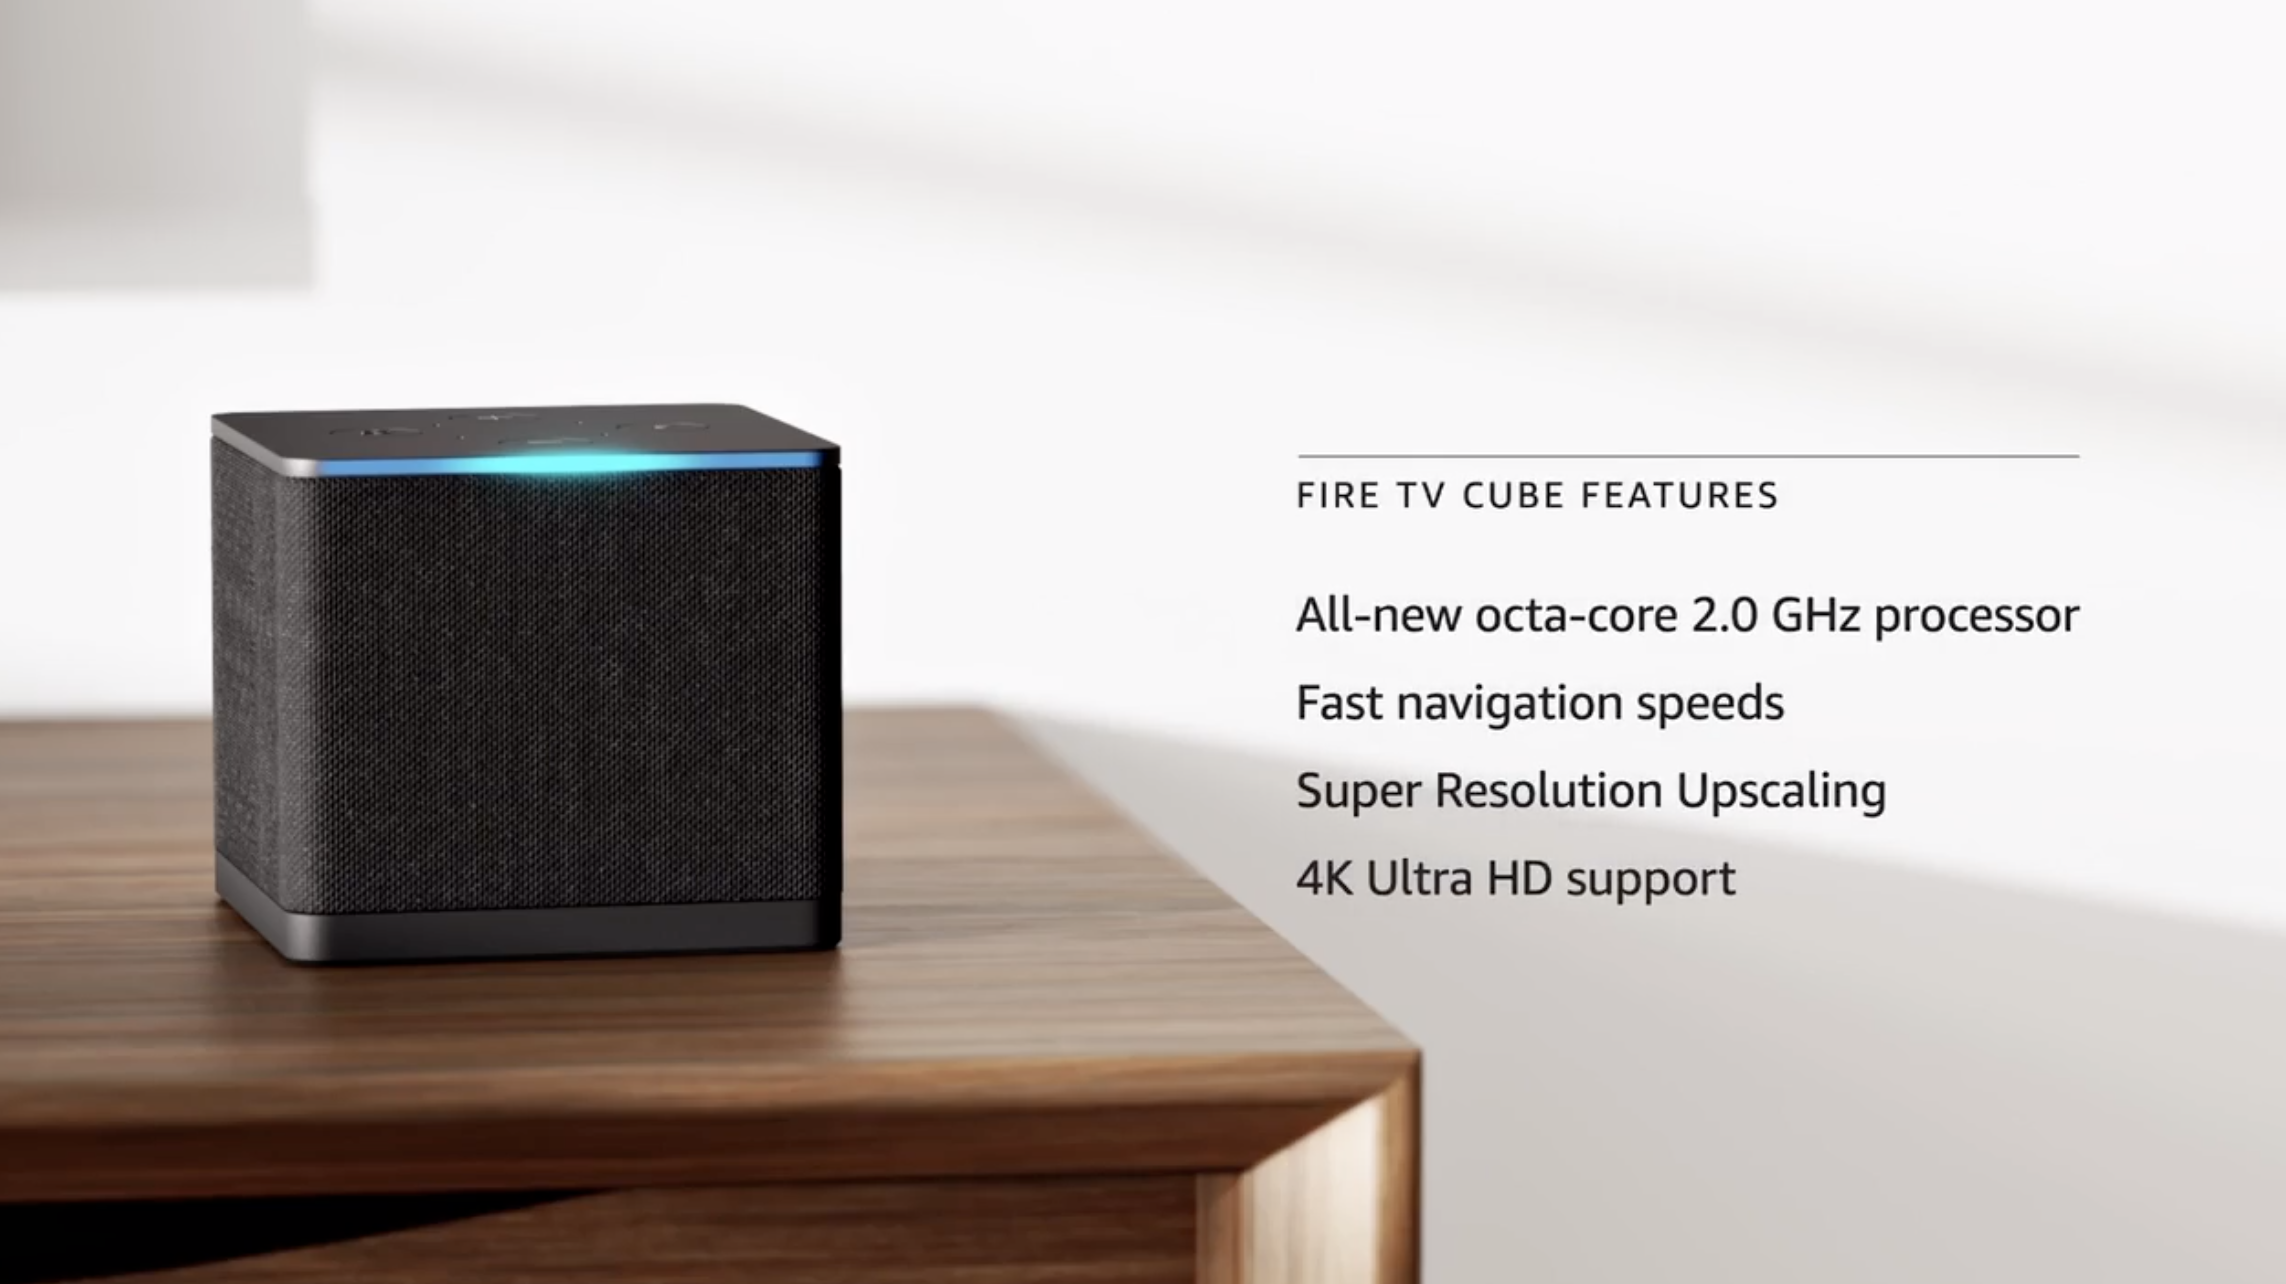 Fire TV Cube at Amazon Event